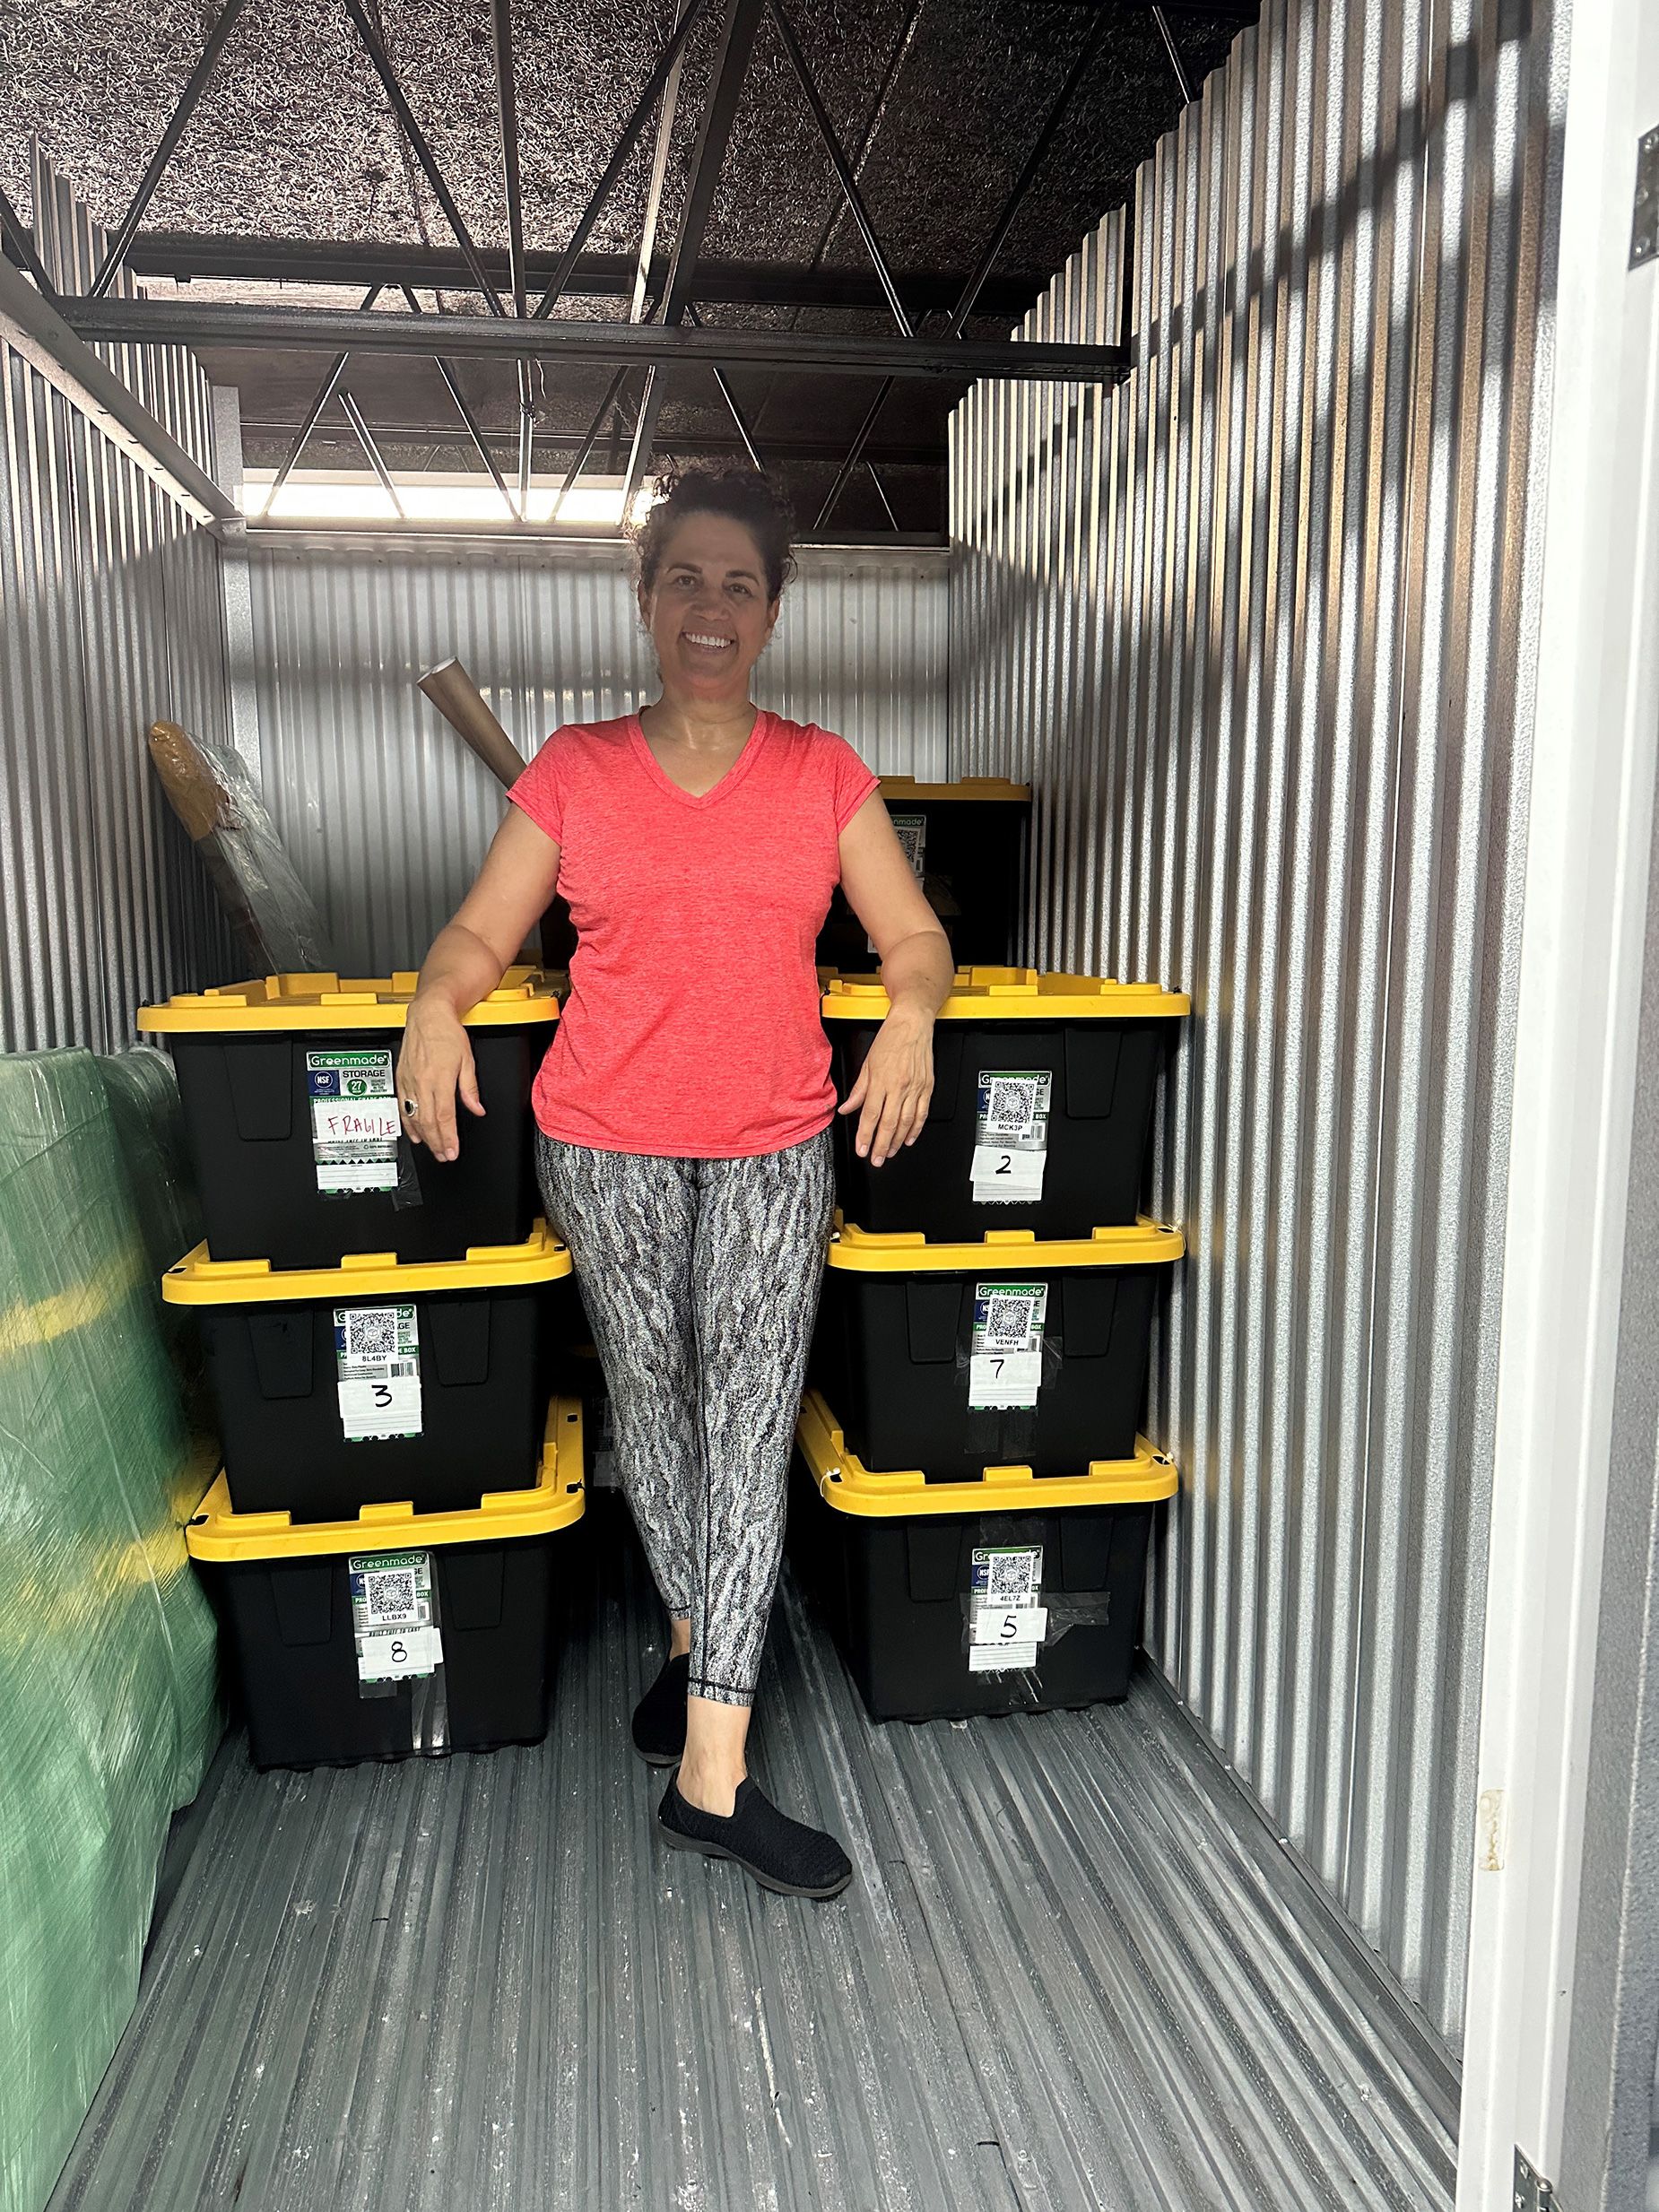 Balzano packed up her life, selling and donating many of her belongings, and also put 14 boxes of items in storage.